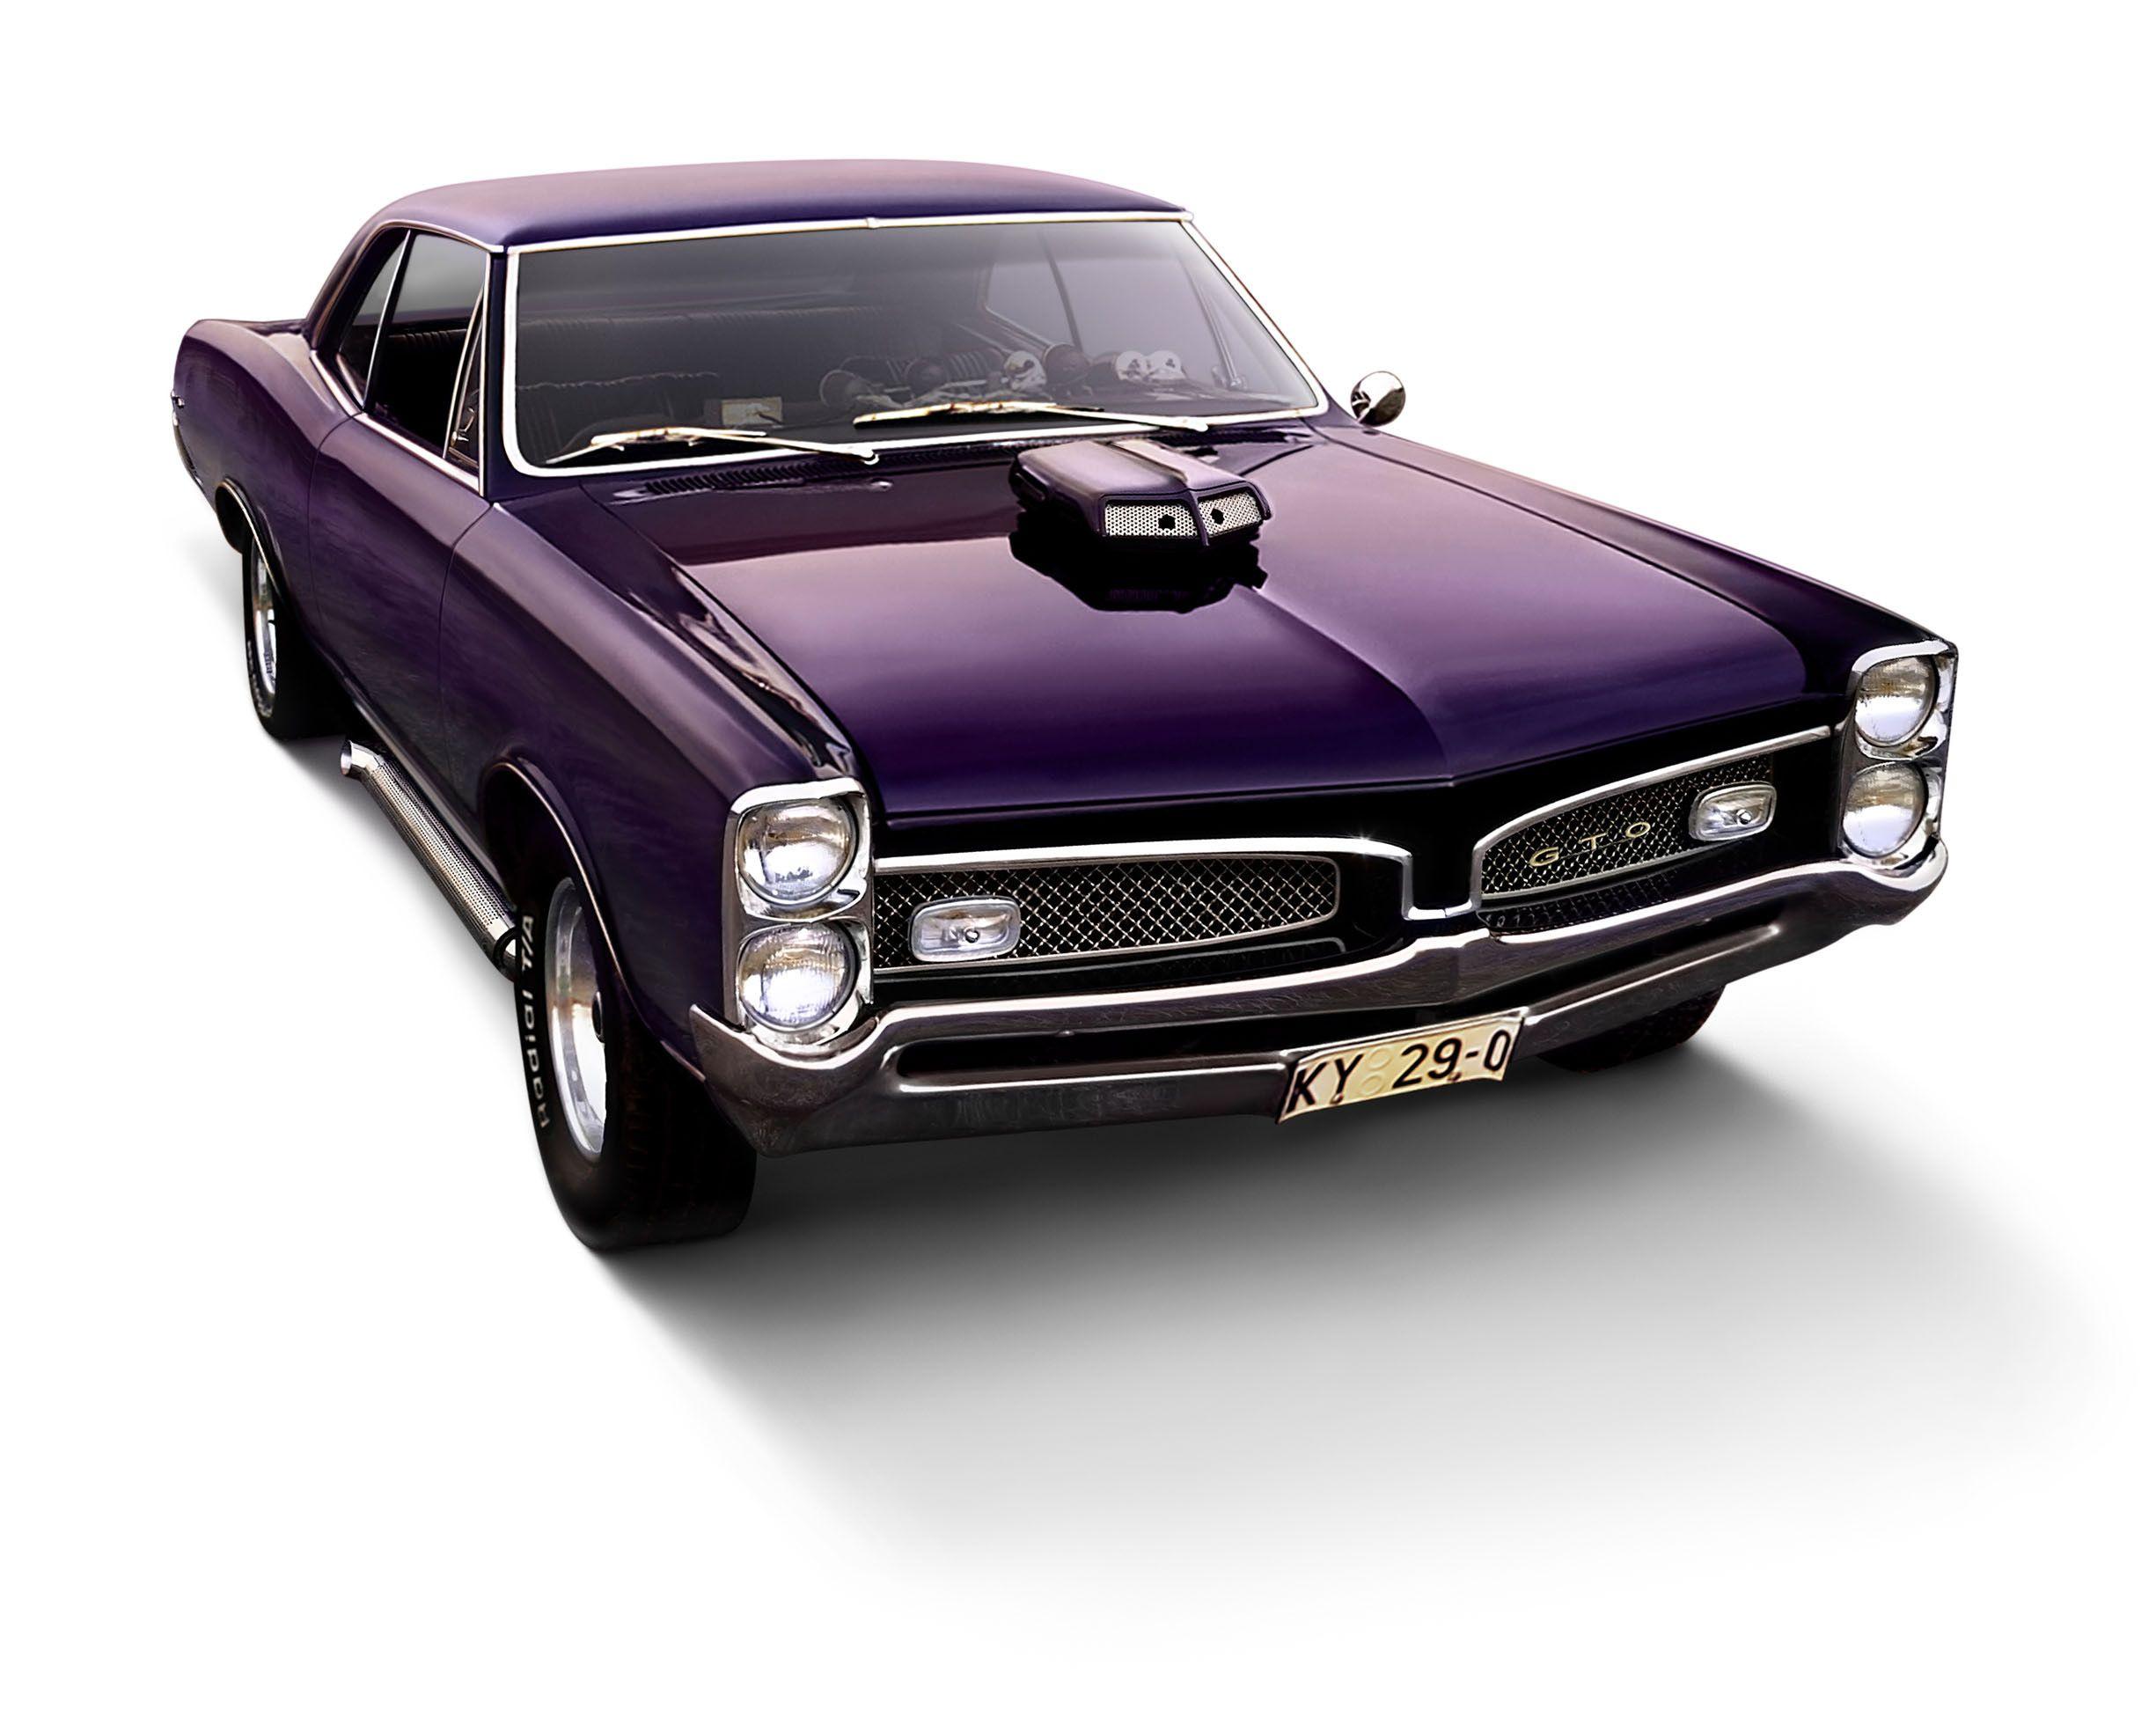 Pontiac GTO HD Wallpaper and Background Image